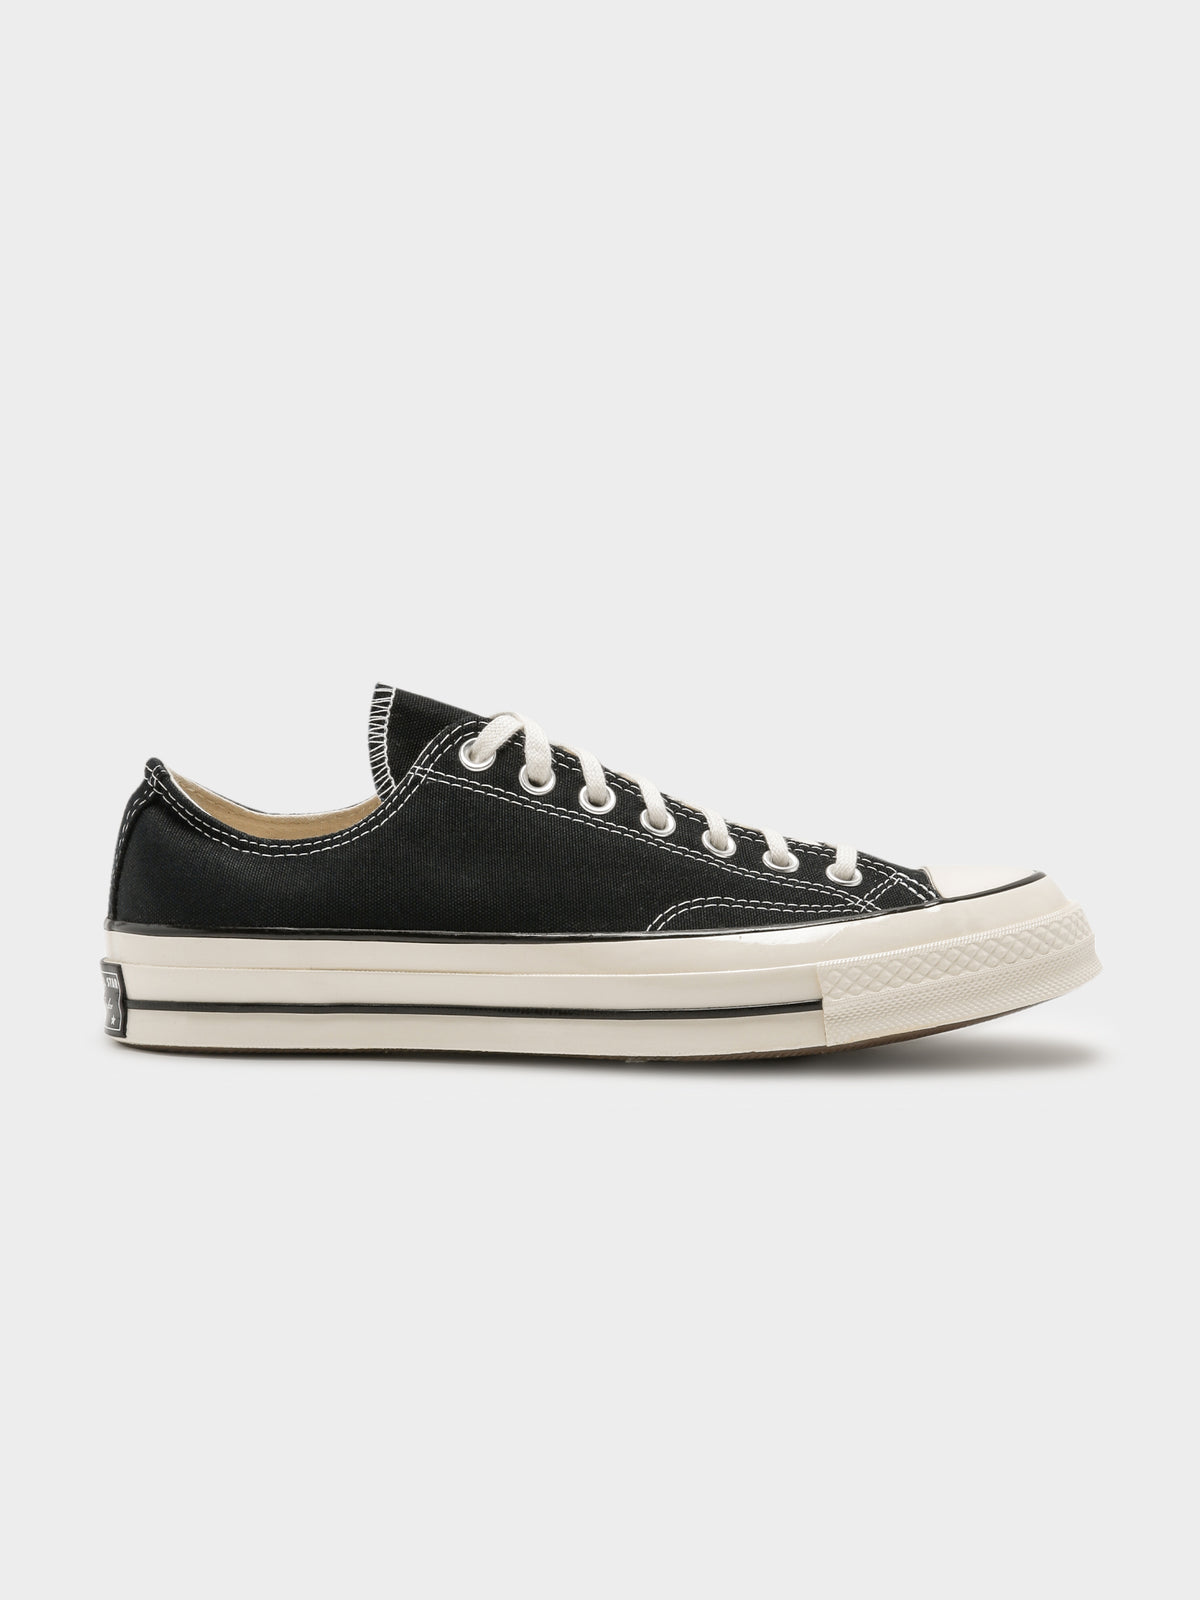 Unisex Chuck Taylor All Star 70 Low Top Sneakers in Black